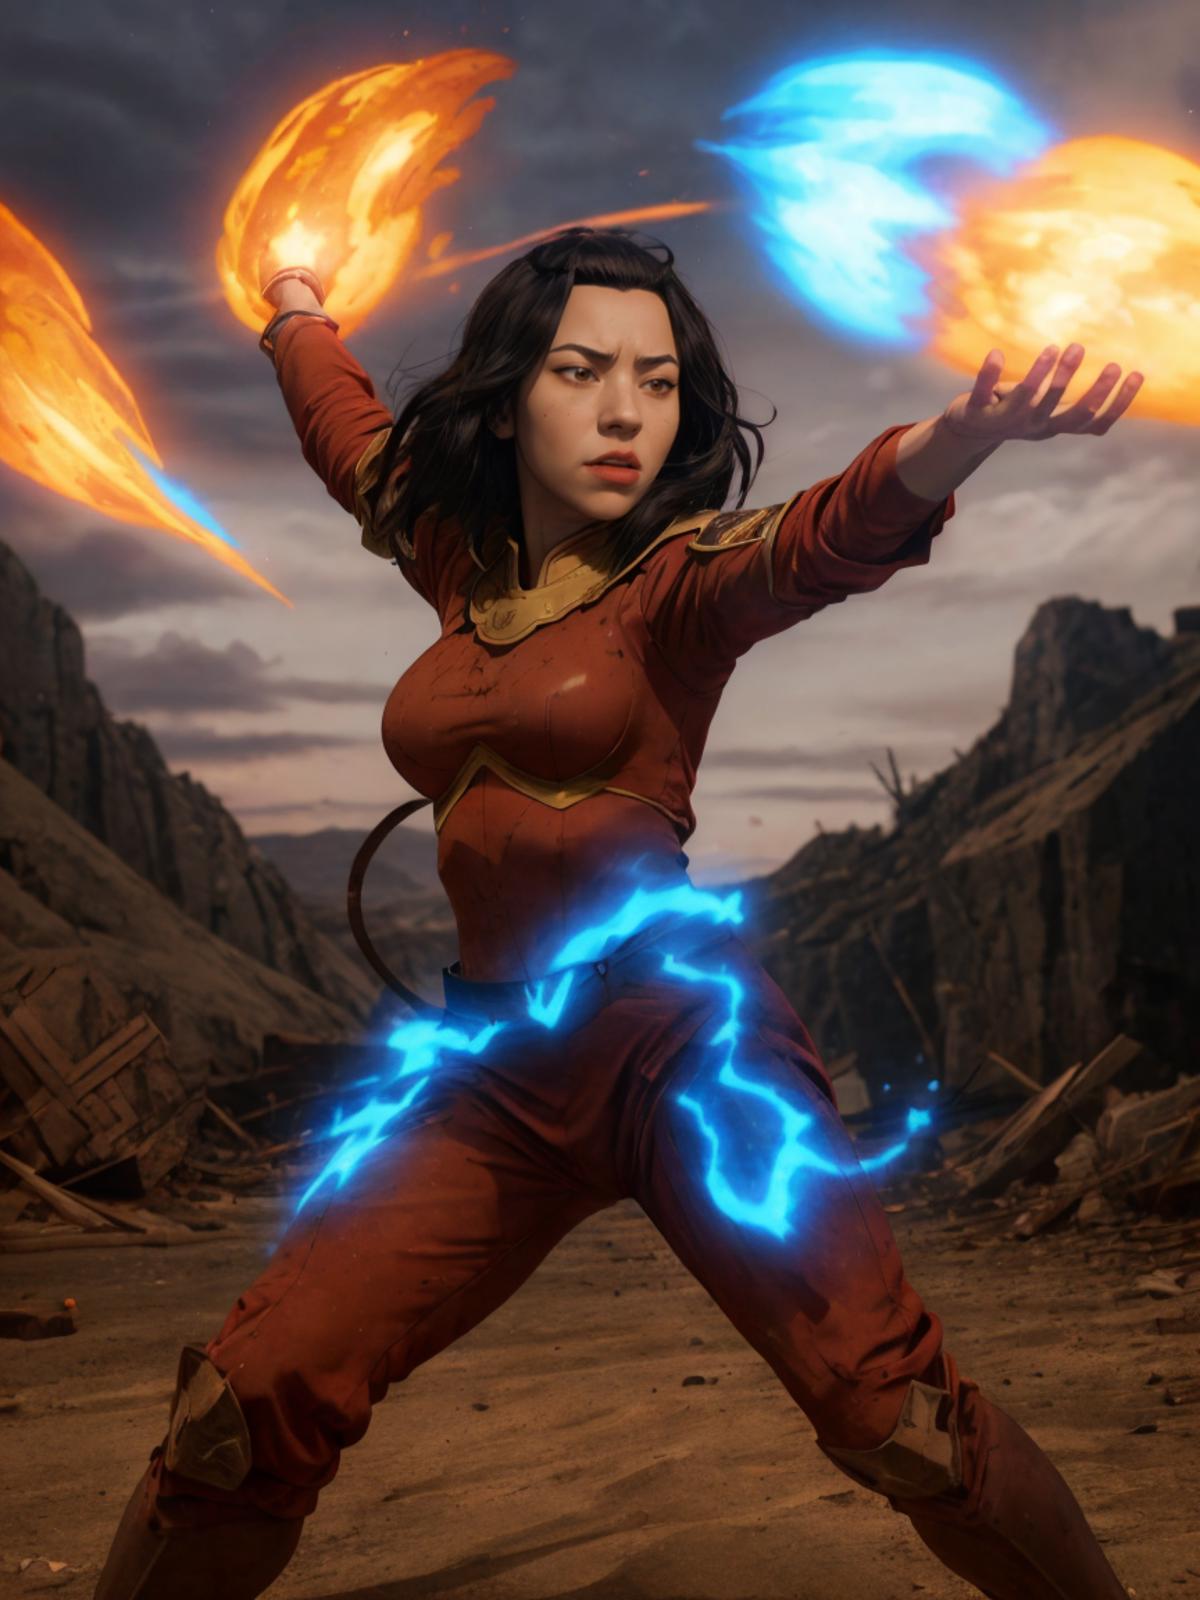 A fantasy art of a woman in a red and gold costume holding lightning bolts.